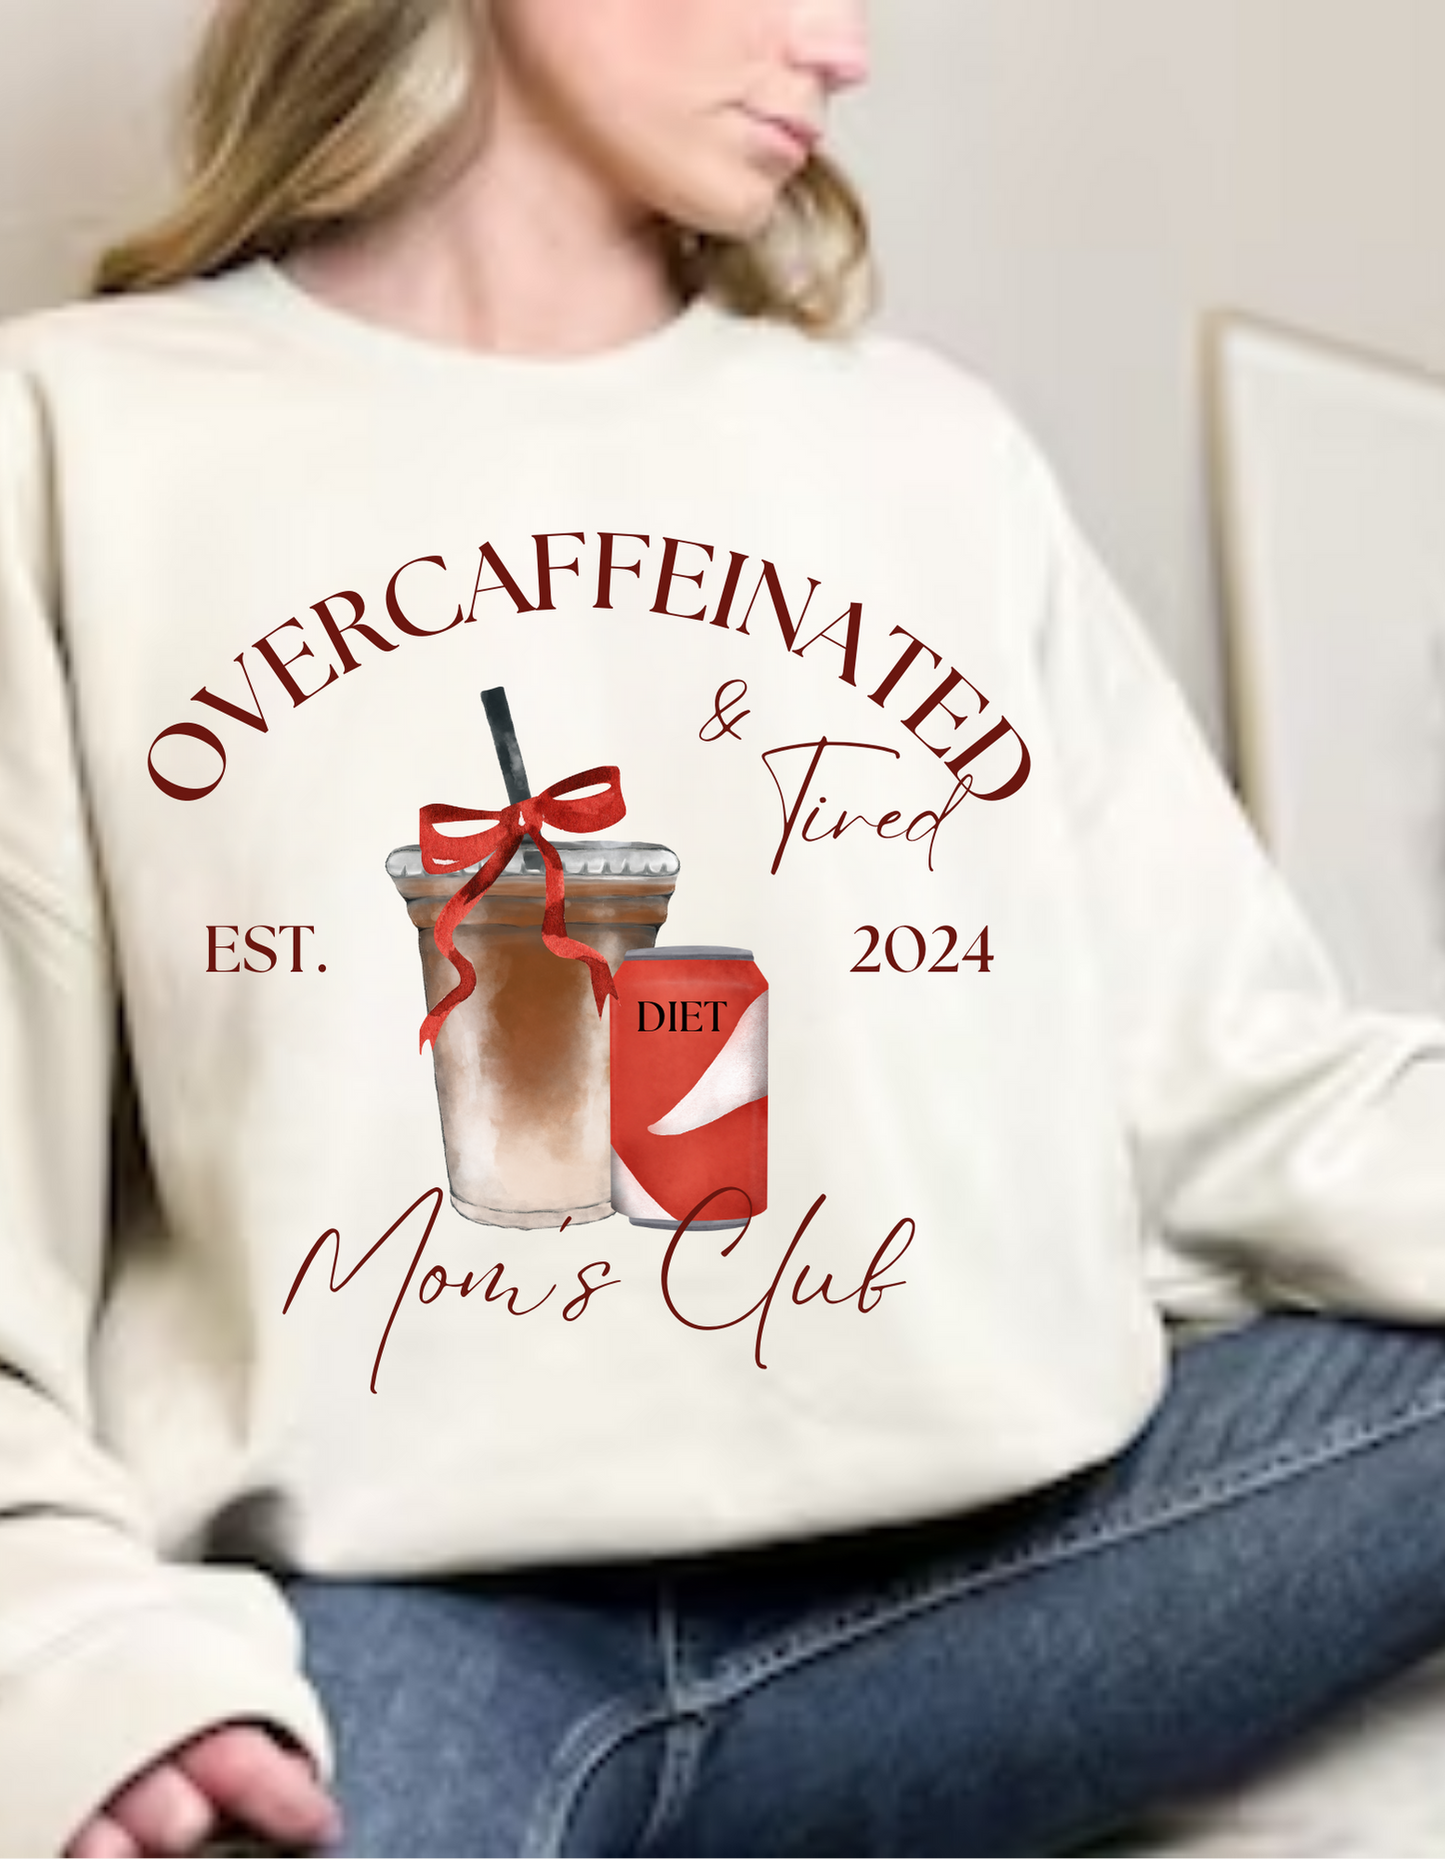 Overcaffeinated and Tired Moms Social Club Adult Pullovers